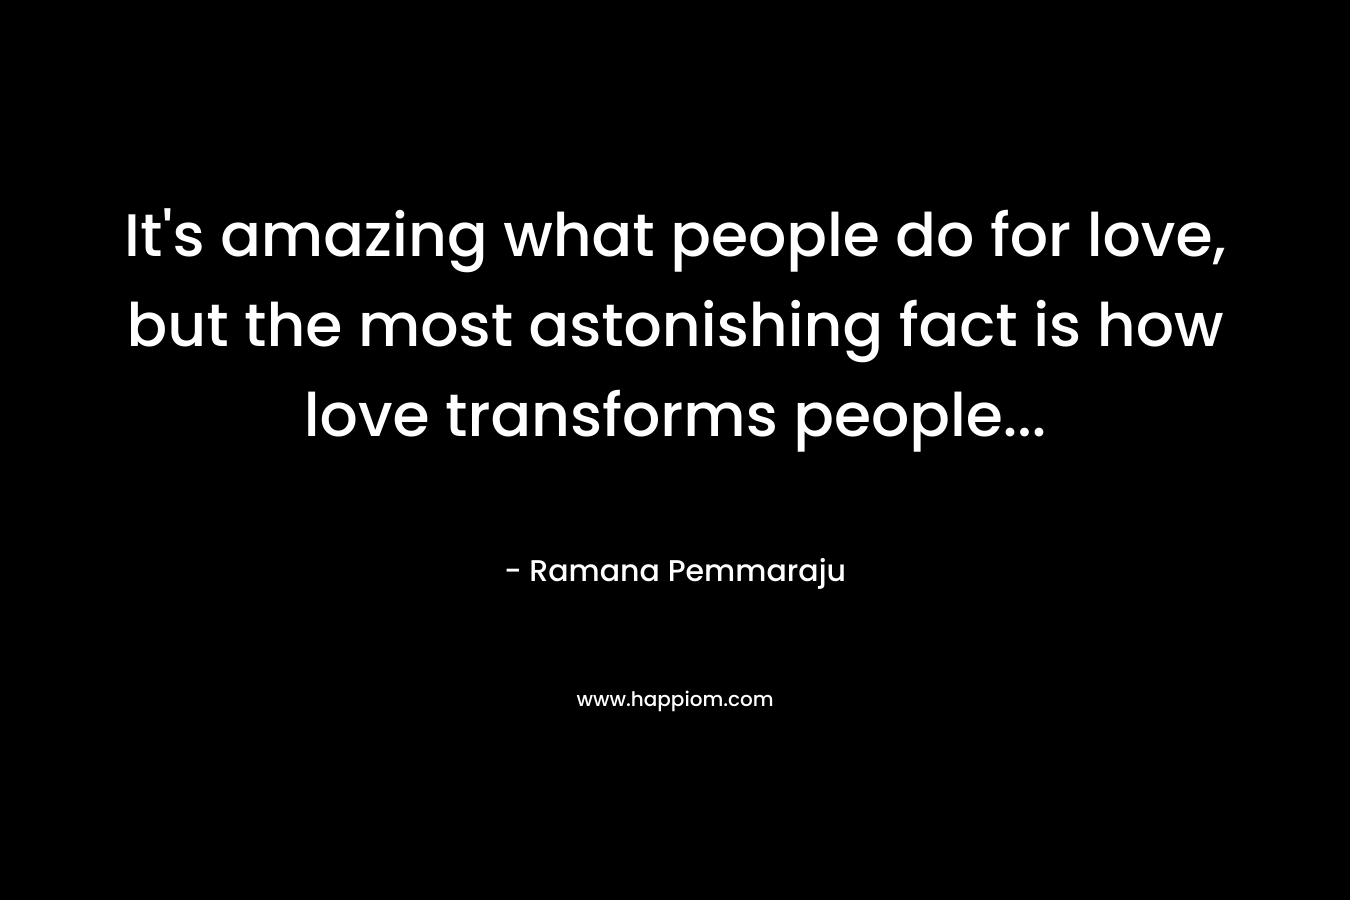 It's amazing what people do for love, but the most astonishing fact is how love transforms people...